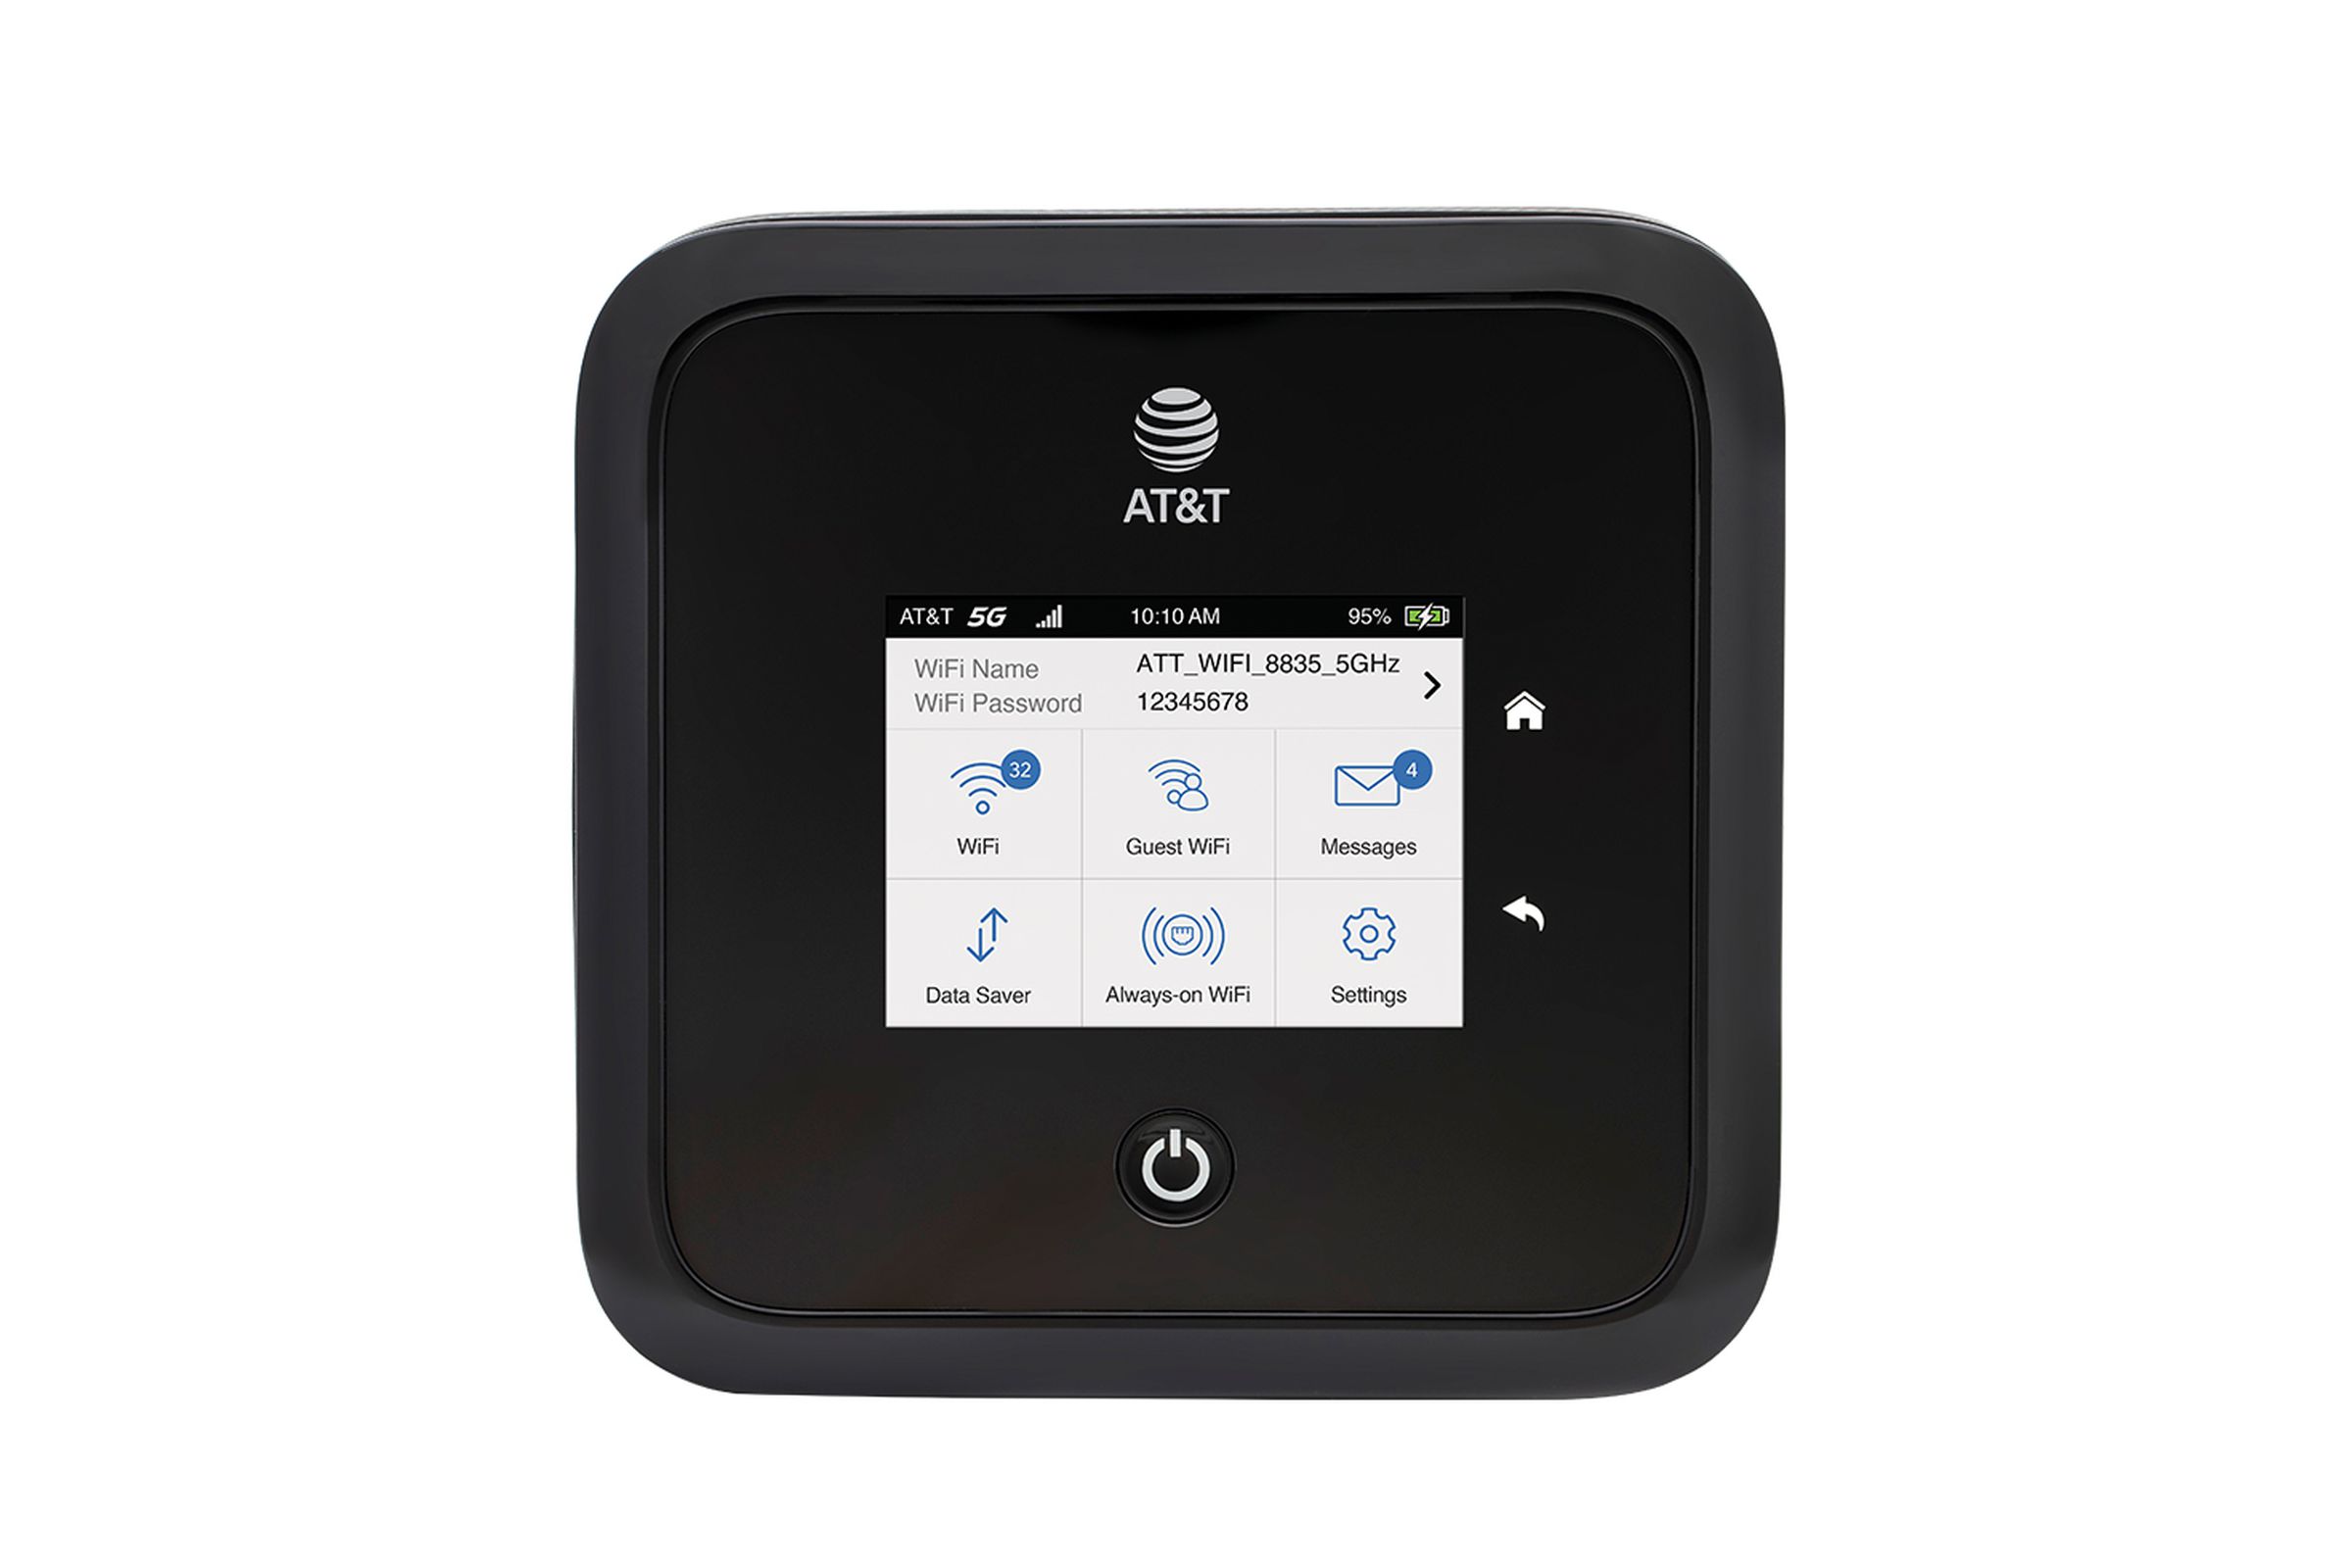 The hotspot can be controlled via a touchscreen.